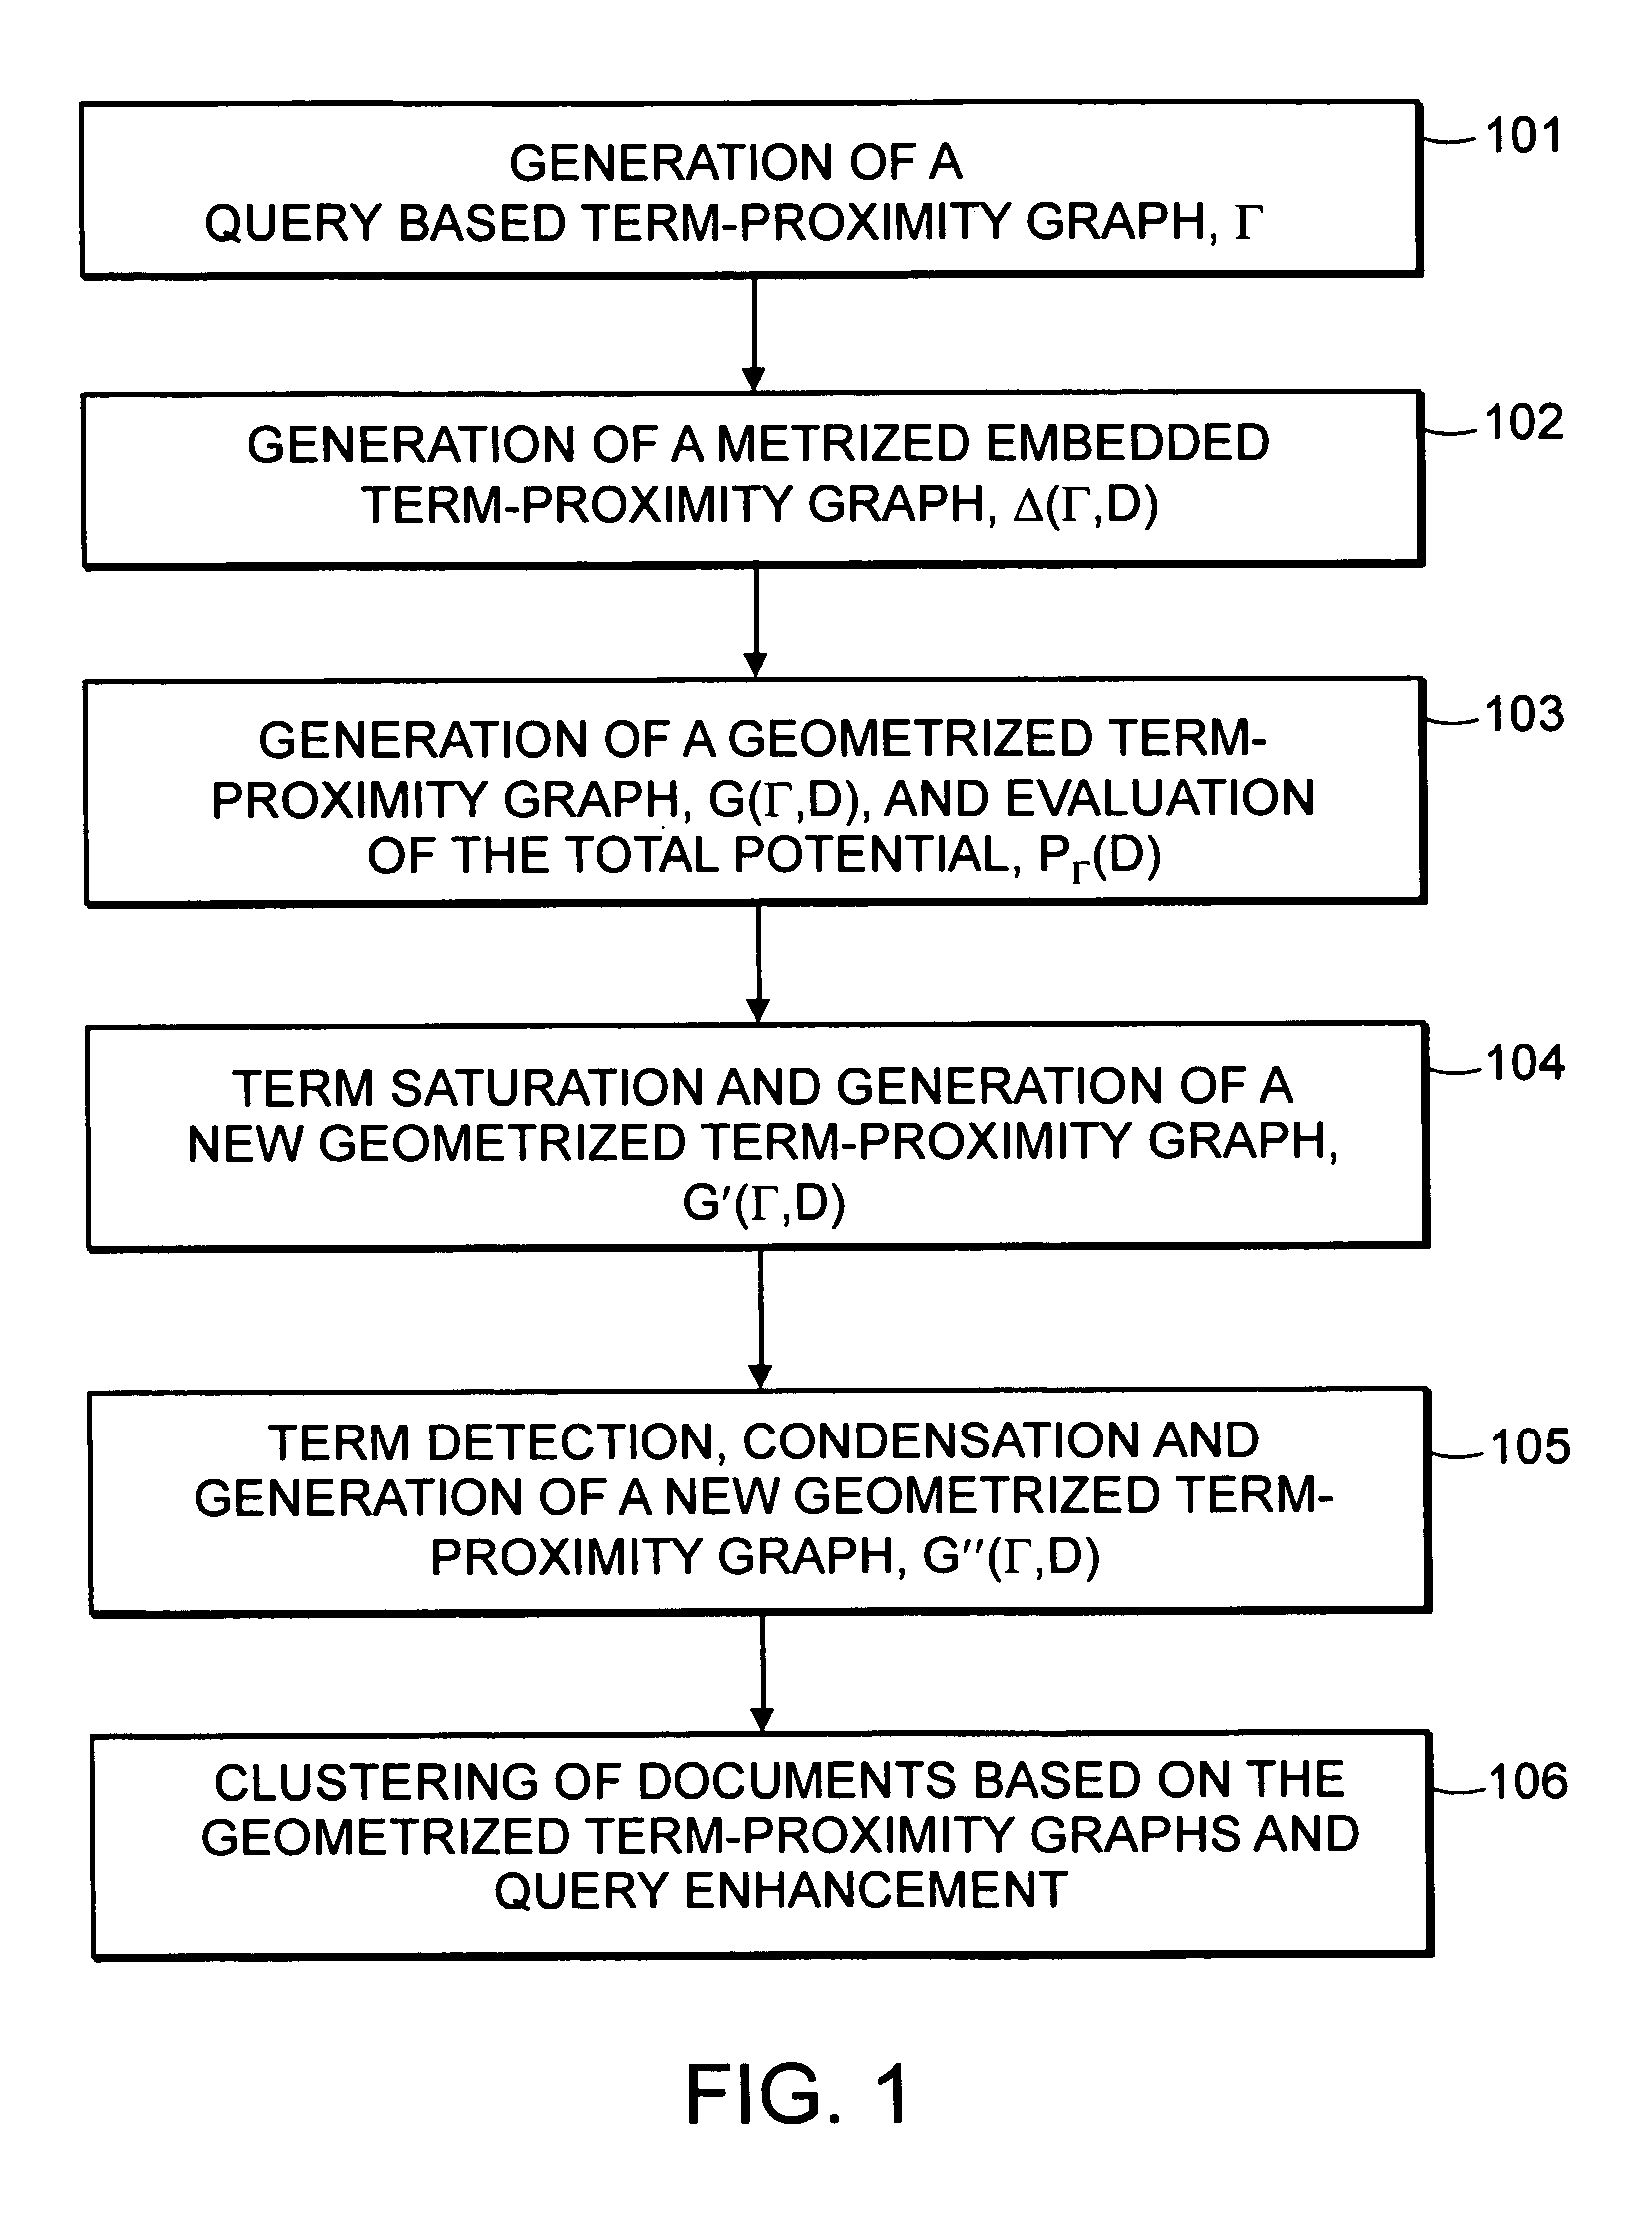 Method and apparatus for informational processing based on creation of term-proximity graphs and their embeddings into informational units